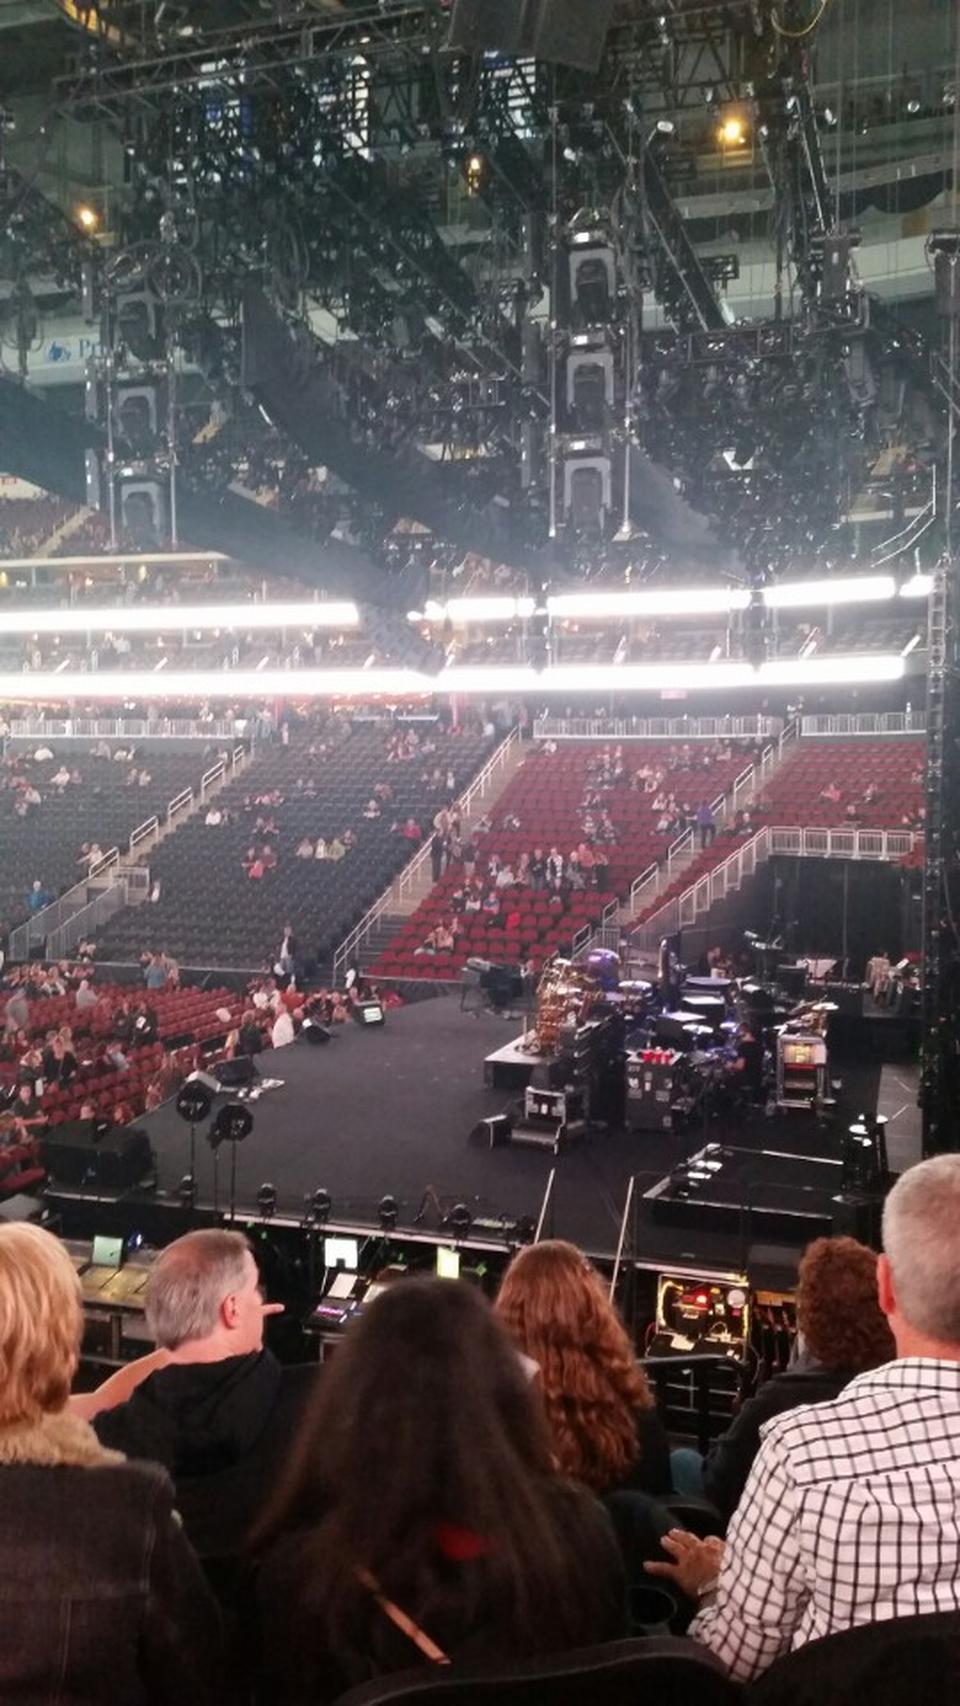 prudential center section 111 row 3｜TikTok Search